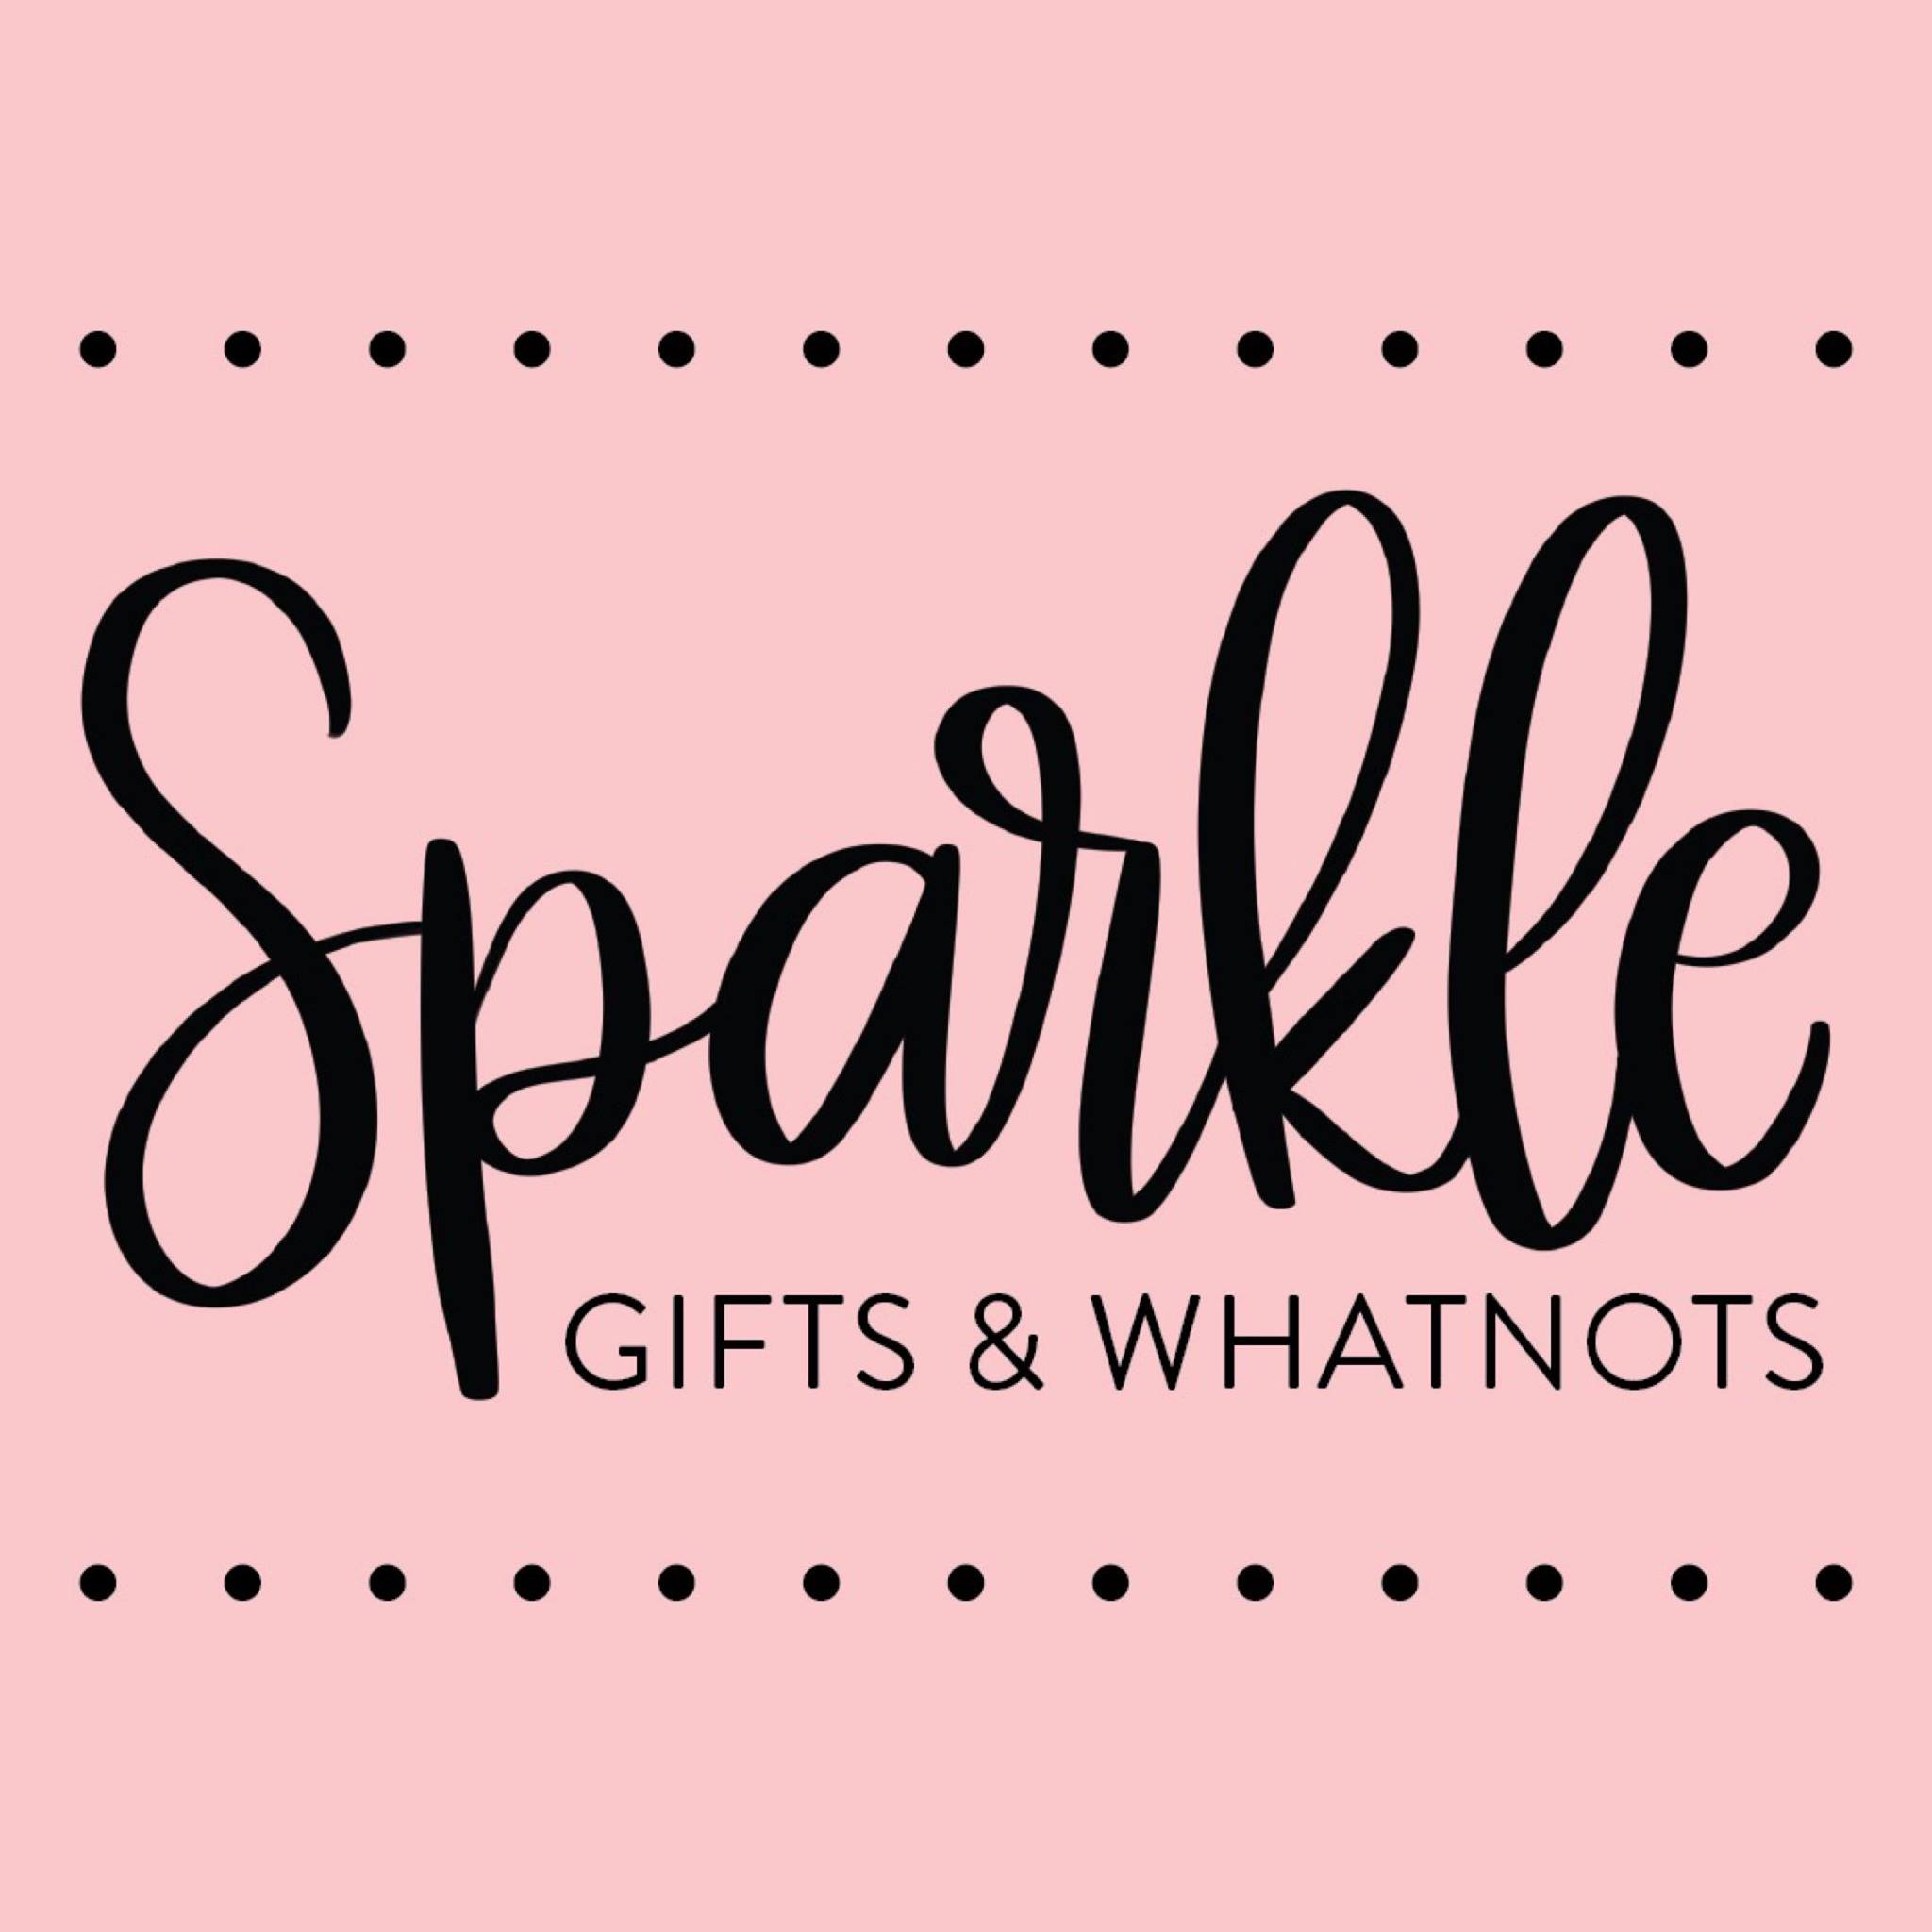 Sparkle Gifts & Whatnots